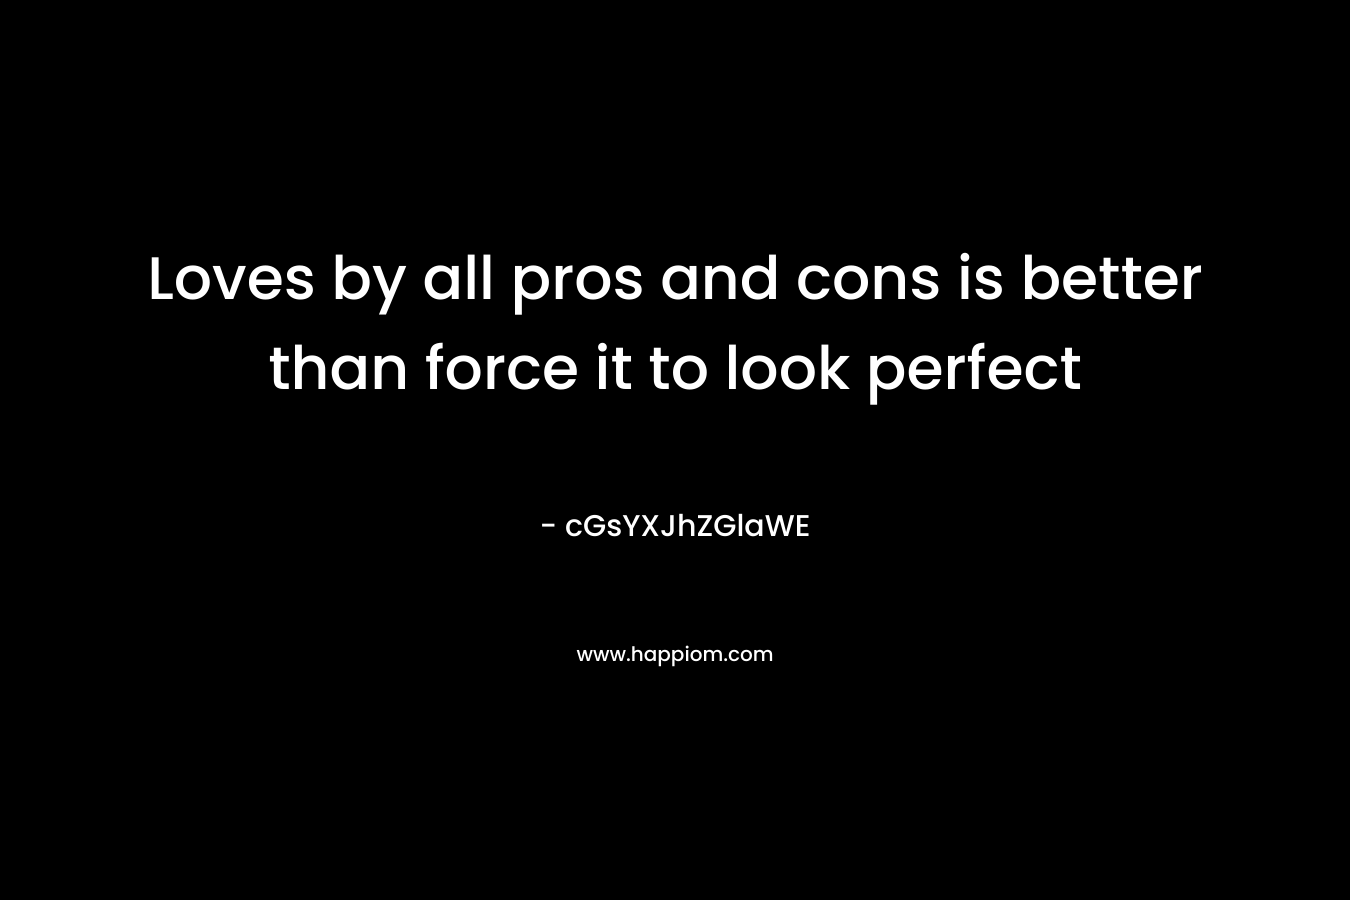 Loves by all pros and cons is better than force it to look perfect